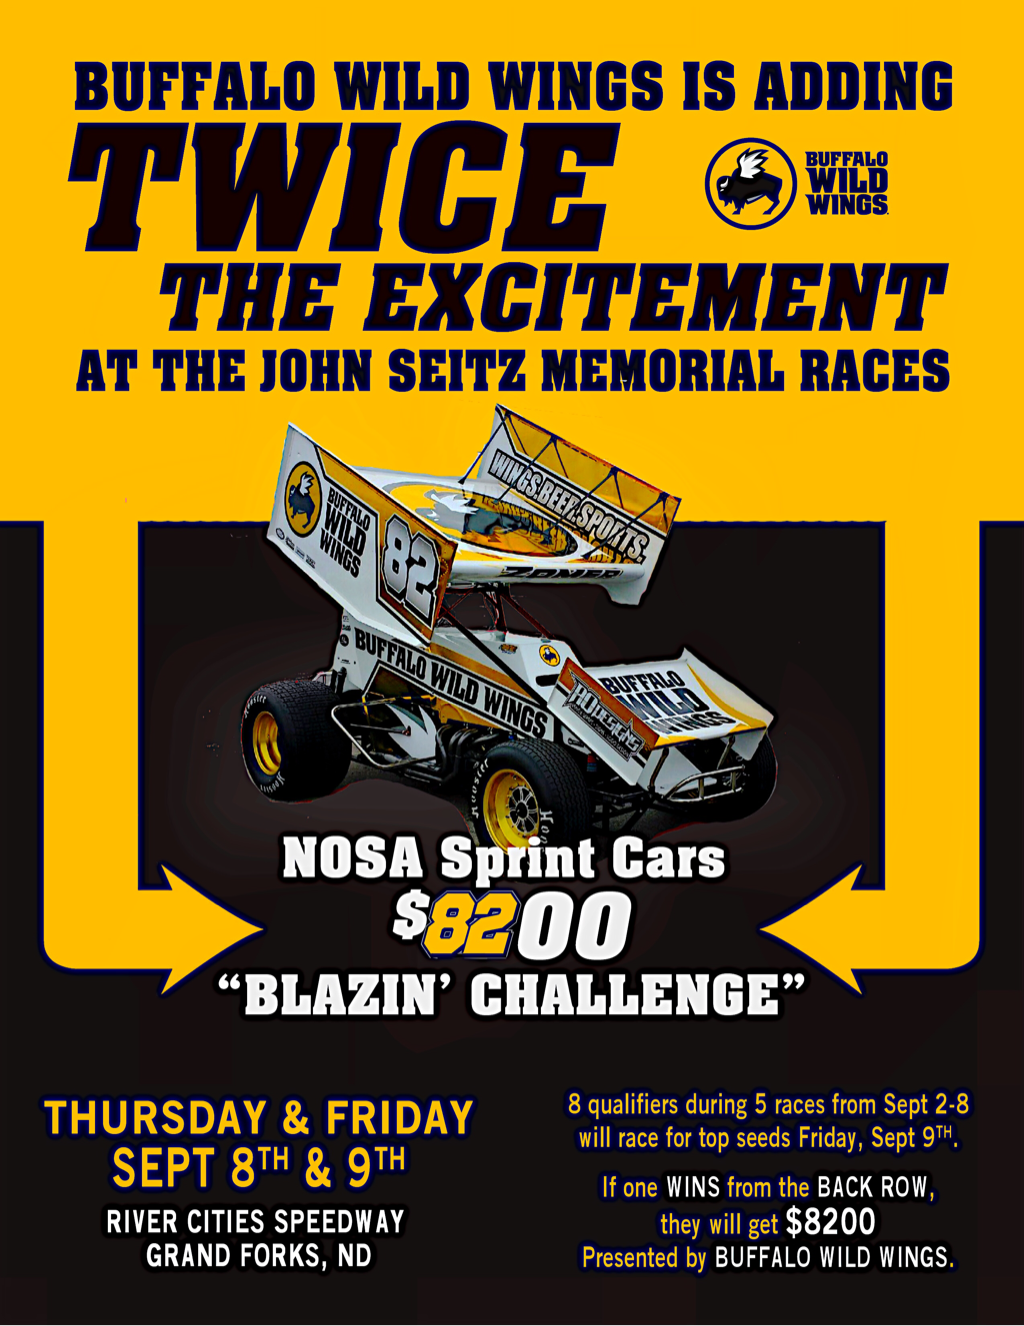 NOSA Sprint Cars $8,200 Buffalo Wild Wings Blazin Challenge to win from the back row